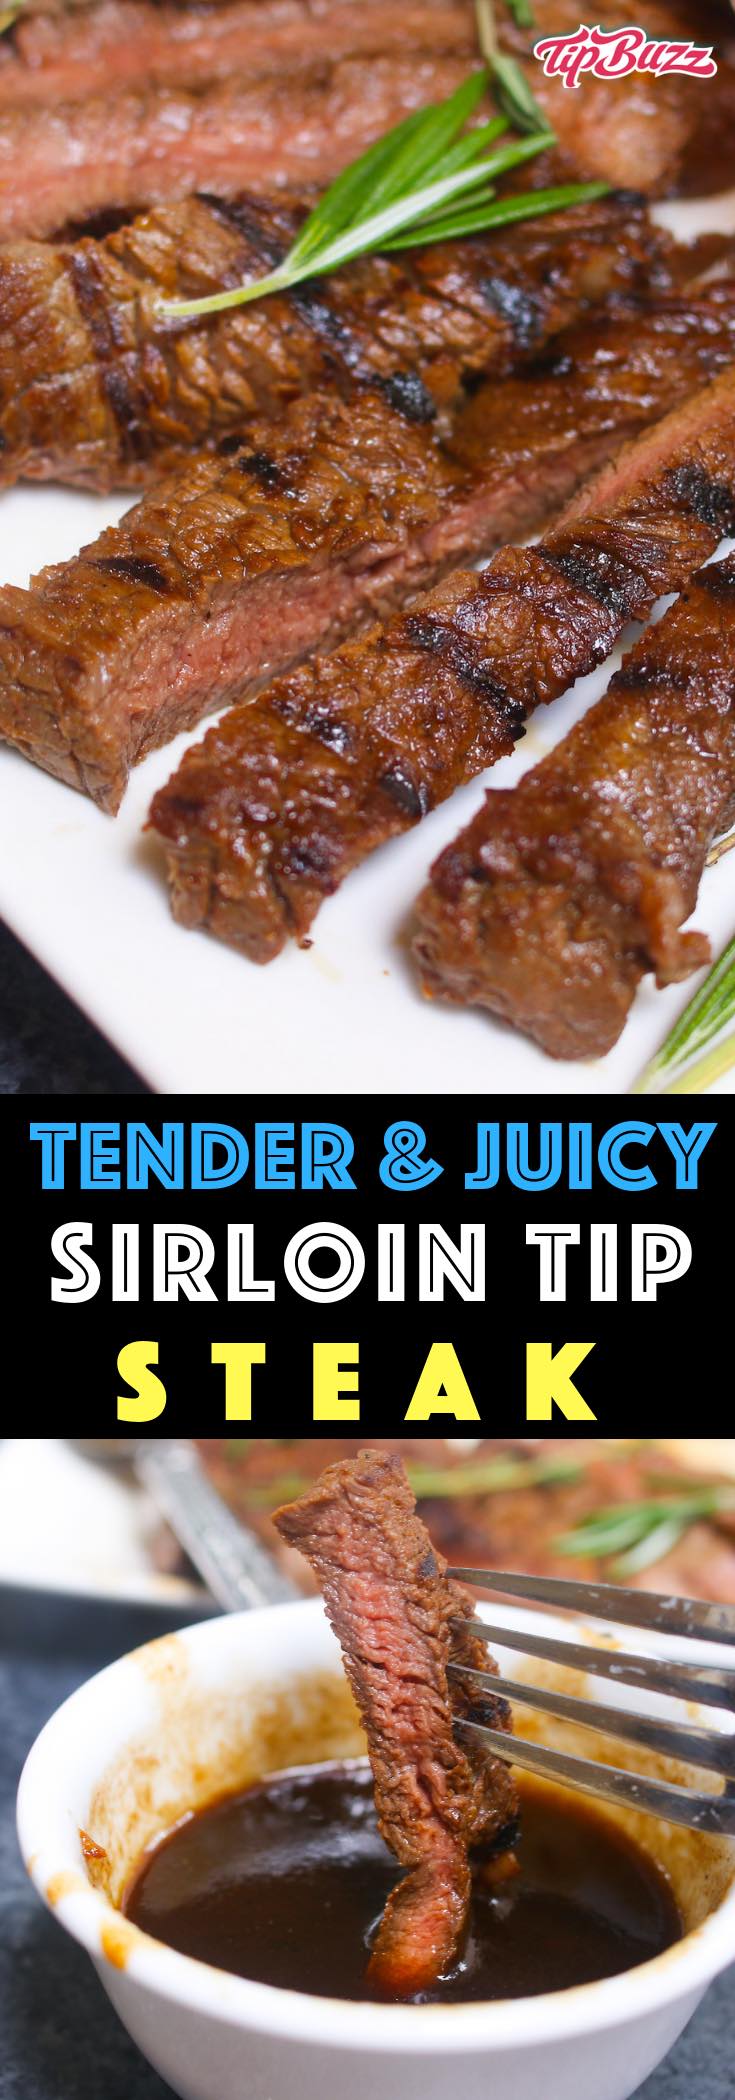 Sirloin Tip Steak is juicy and flavorful with a crunchy crust on the outside. A simple balsamic and honey marinade turns this lean cut into a tender steak dinner that melts in your mouth.